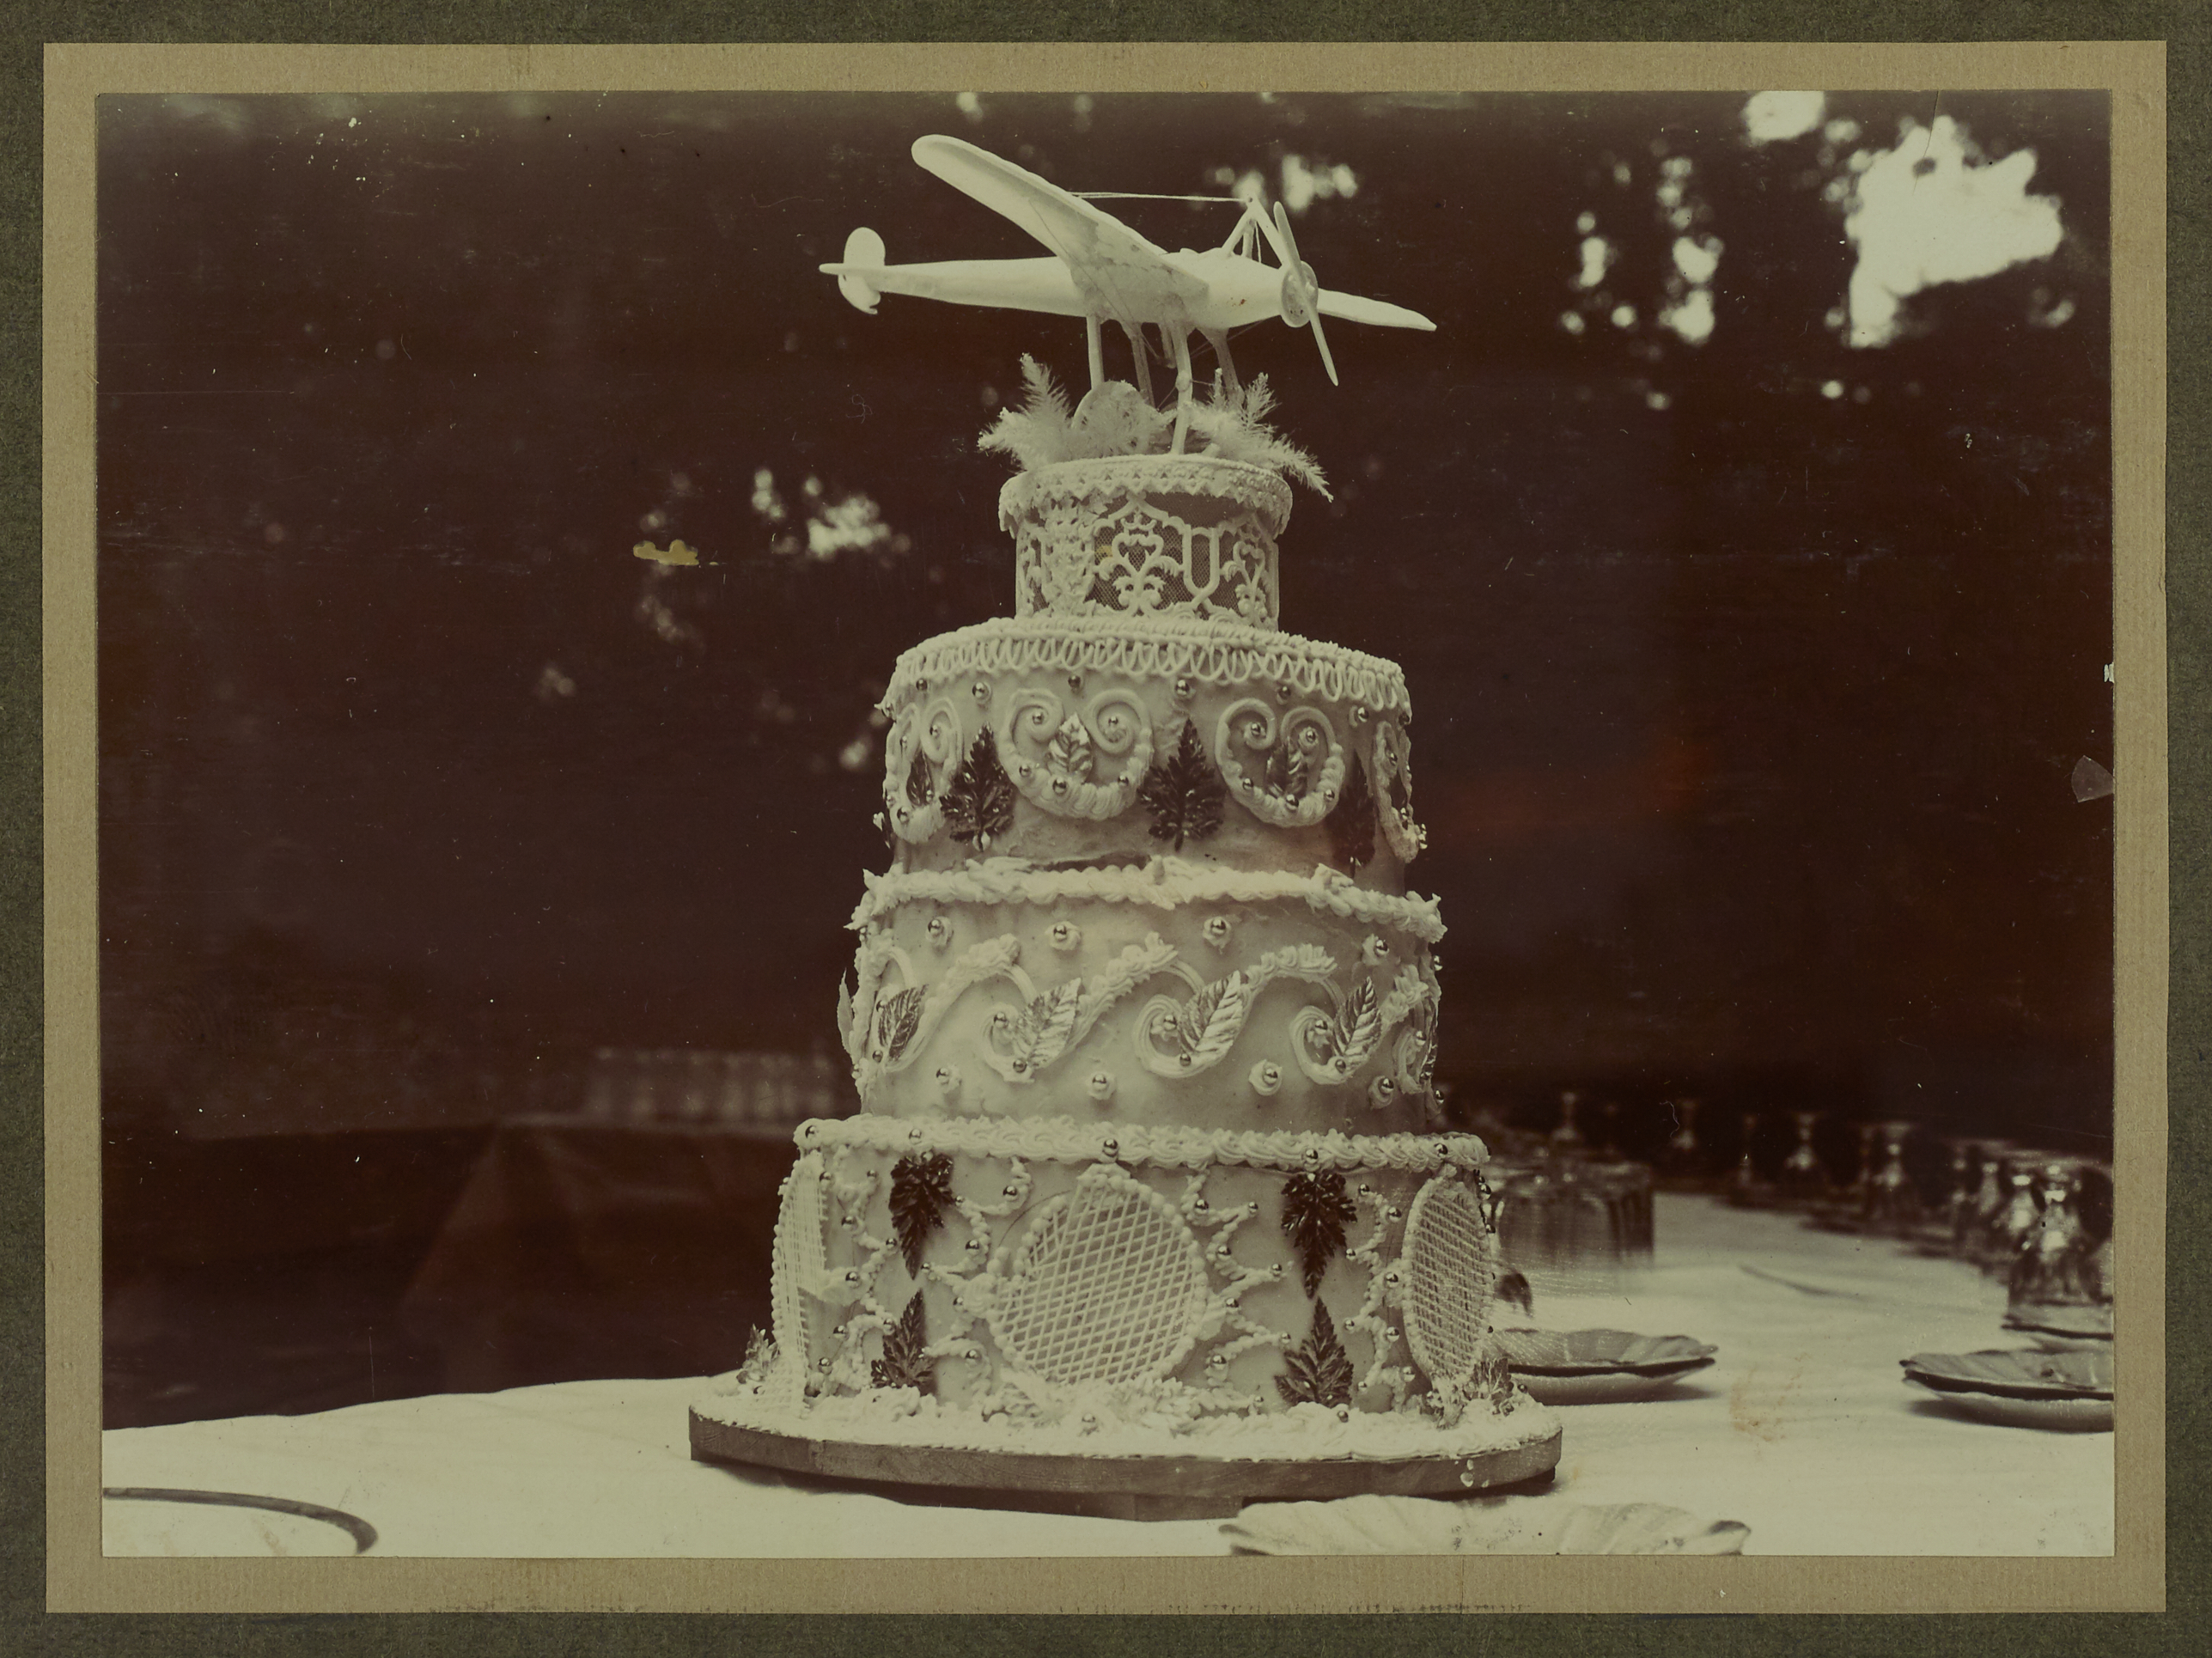 Ornate, four tiered cake topped with a model aeroplane